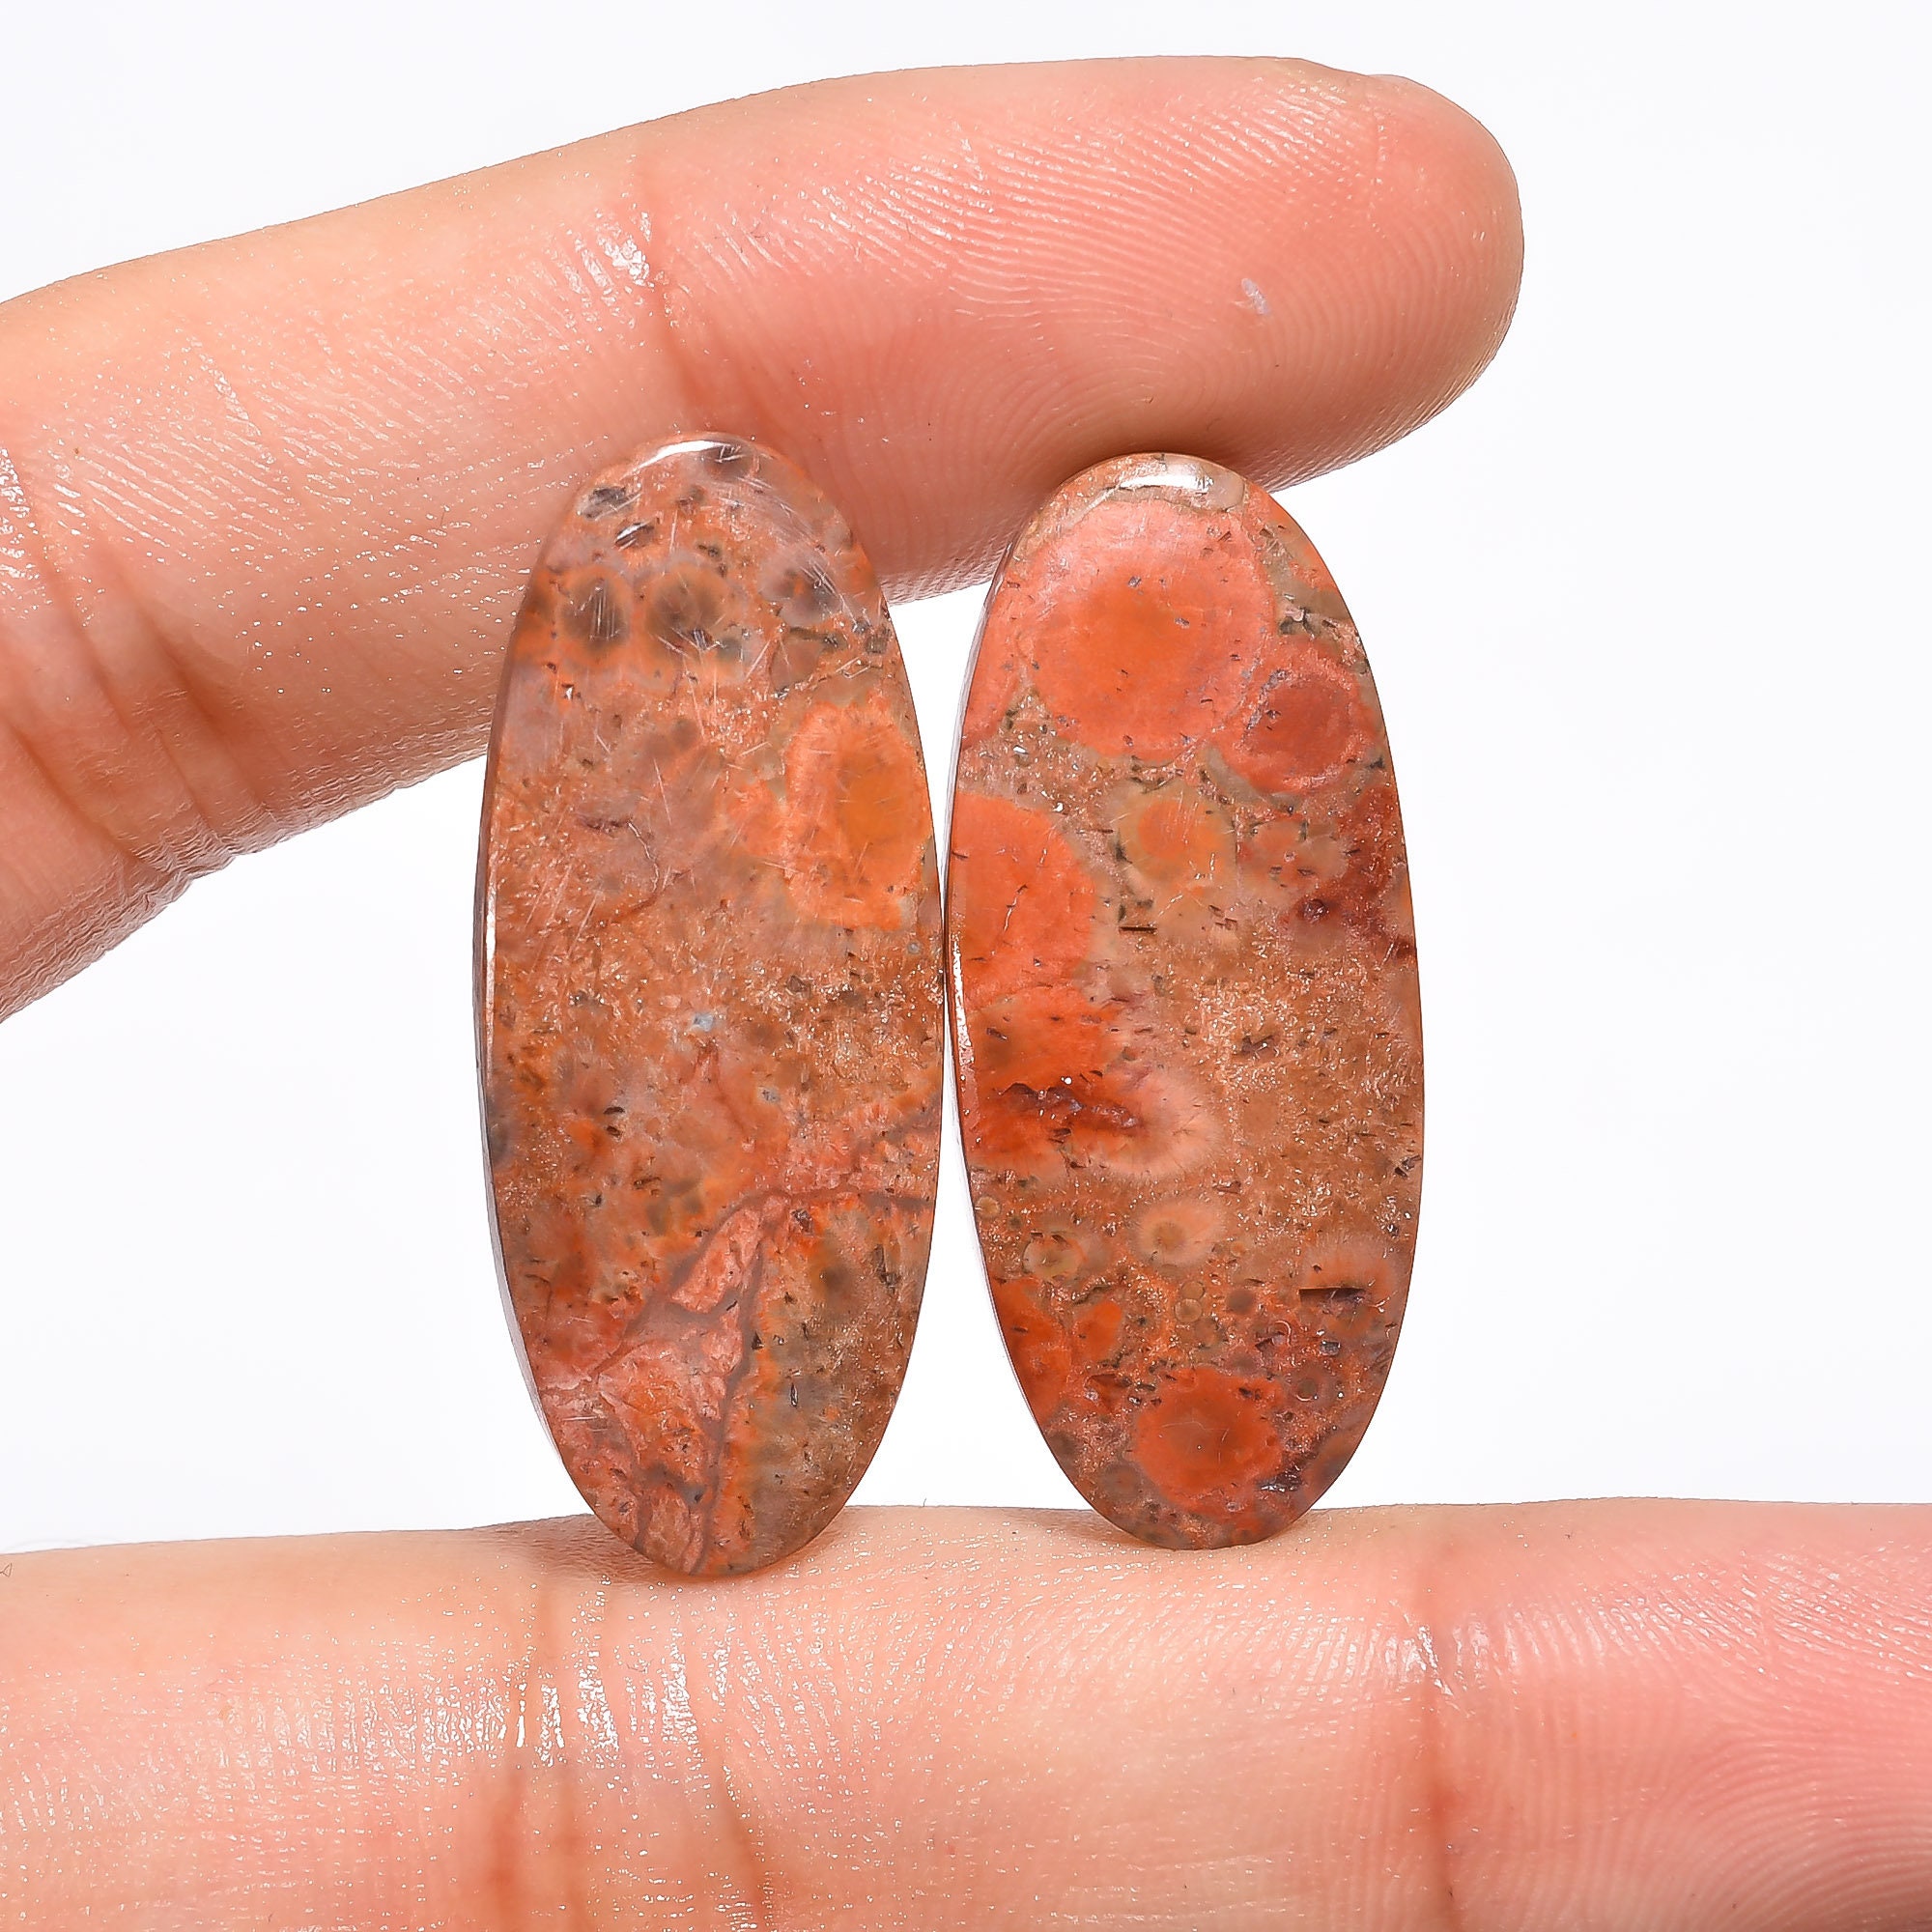 35X25X5 mm JMK-12902 Supreme A One Quality 100% Natural Poppy Jasper Oval Shape Cabochon Loose Gemstone For Making Jewelry 32.5 Ct